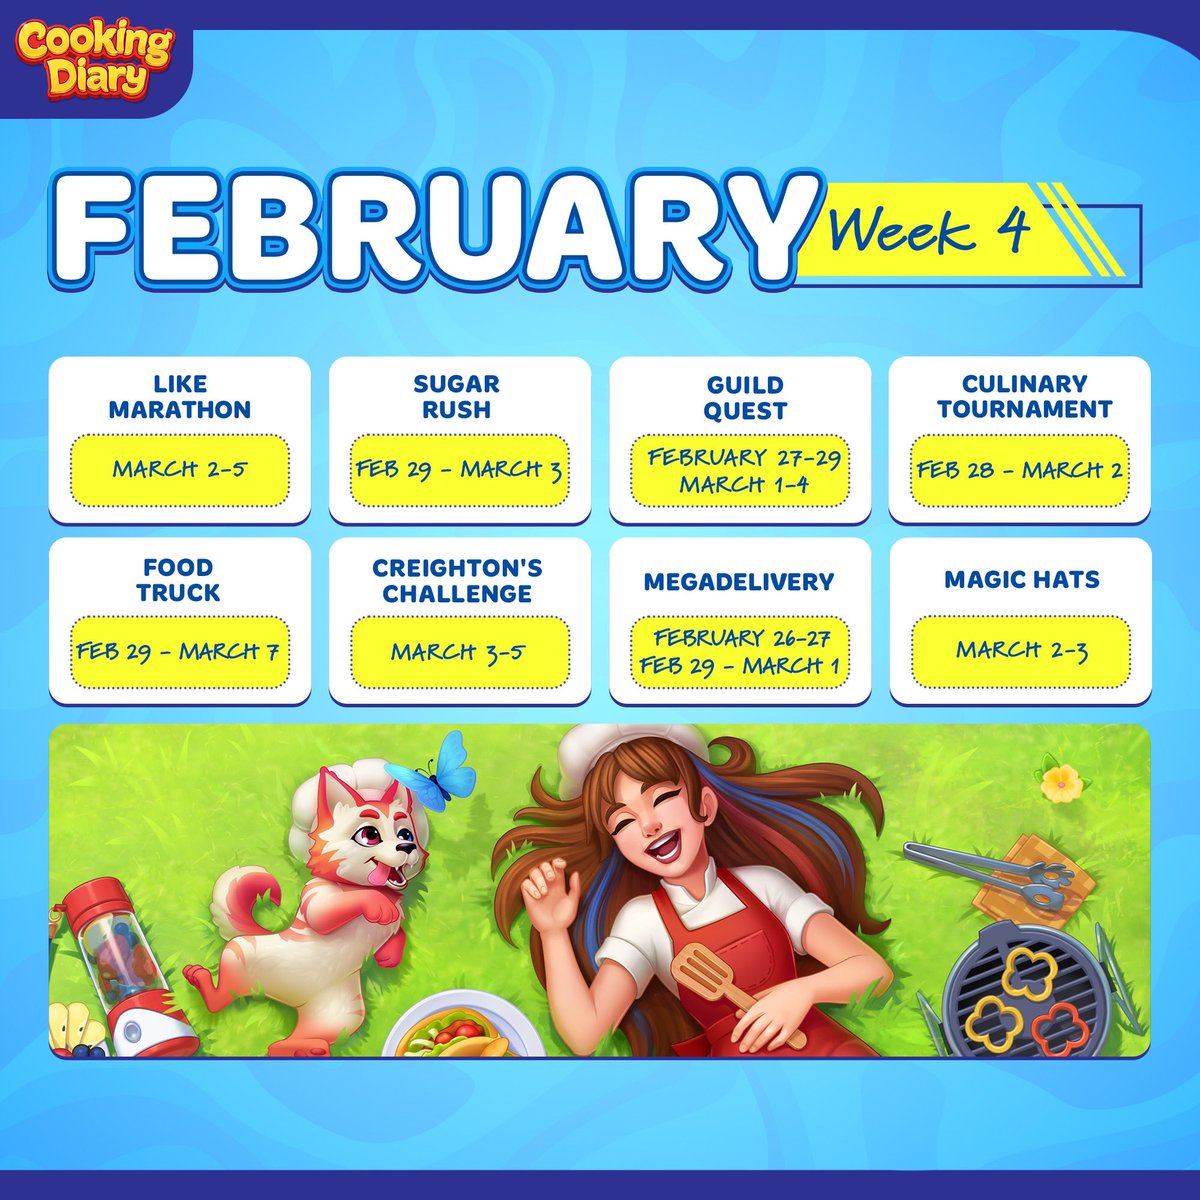 Prepare for an exciting week with our fresh event calendar! 🍔 